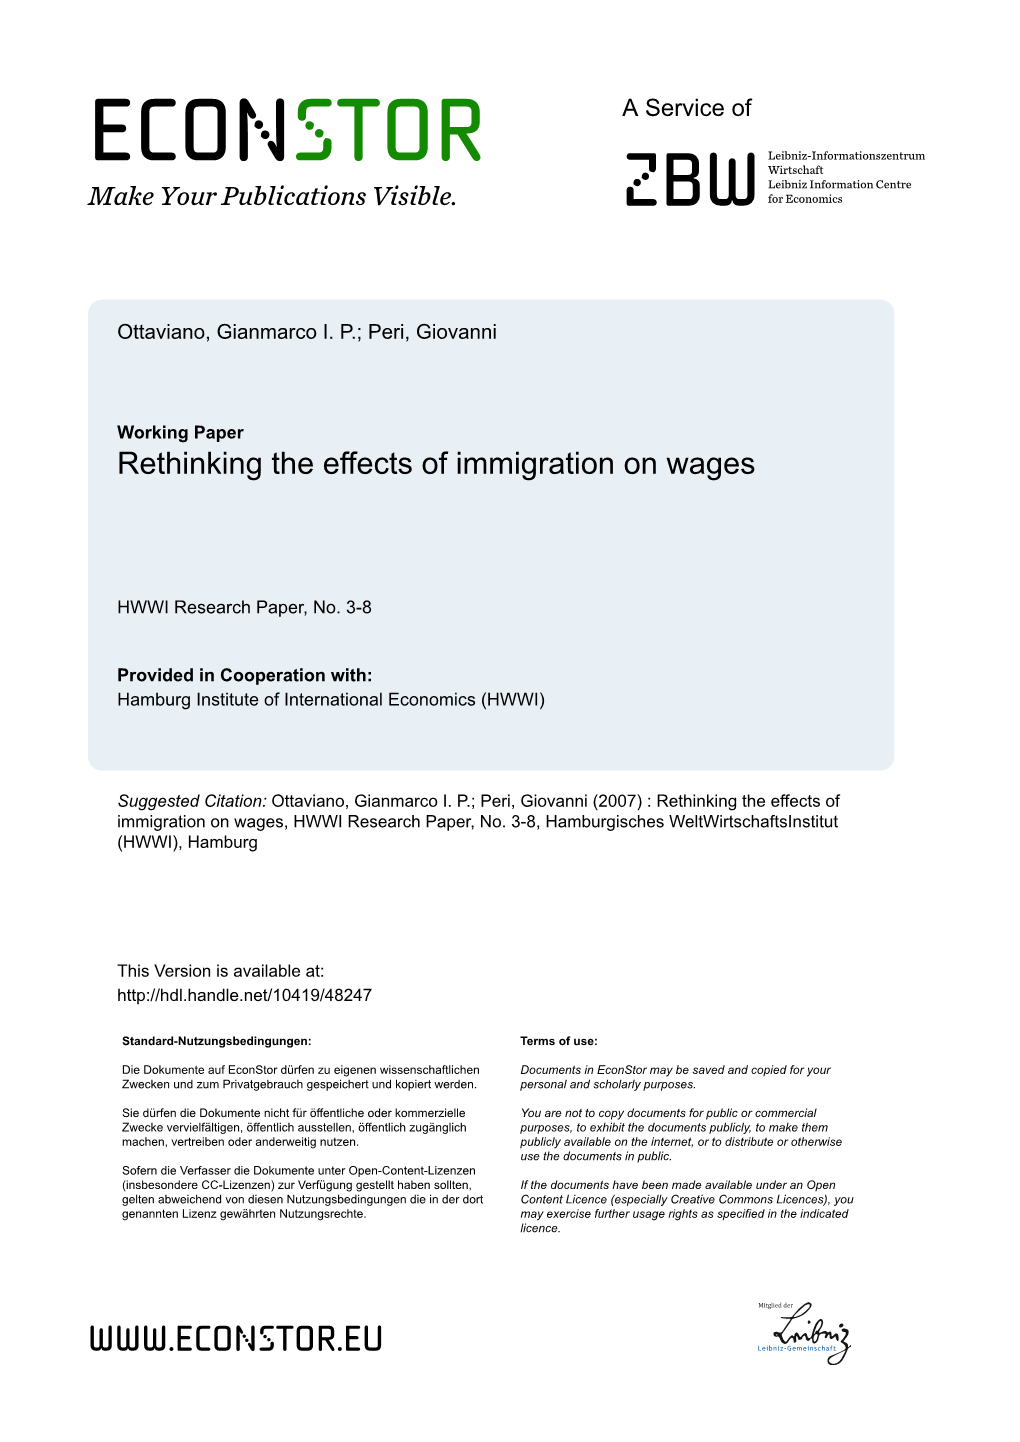 Rethinking the Effects of Immigration on Wages